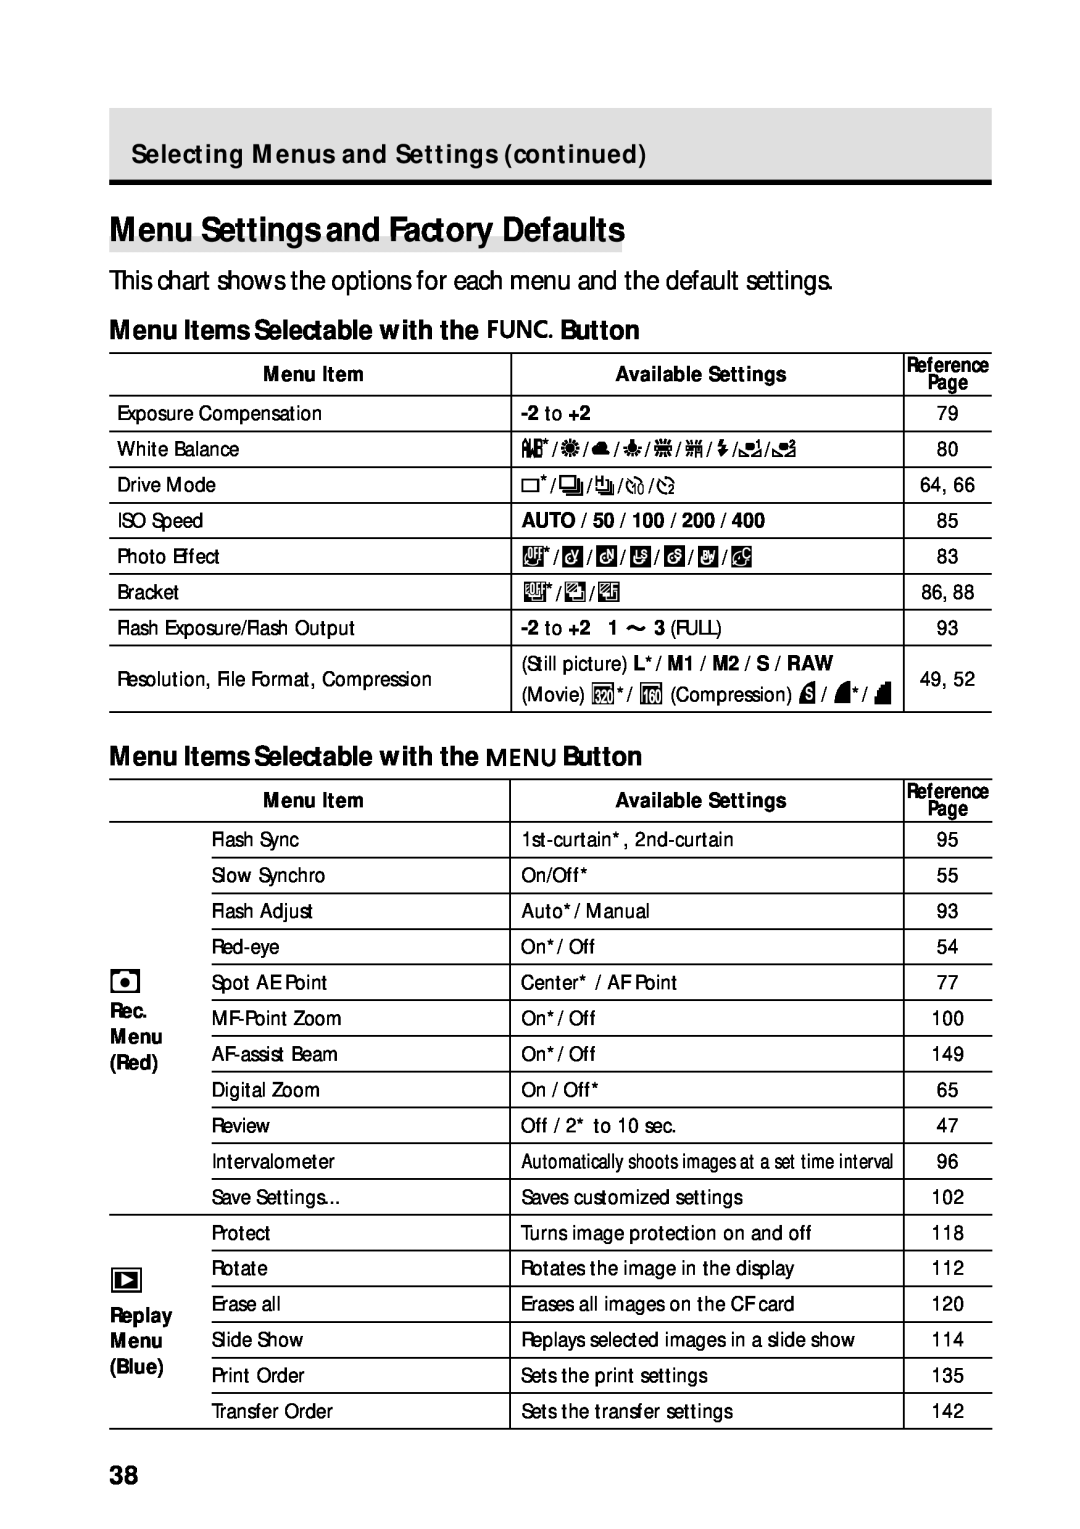 Canon PowerShot S45 Menu Settings and Factory Defaults, Button, Selecting Menus and Settings continued, Menu Item, 2 to +2 